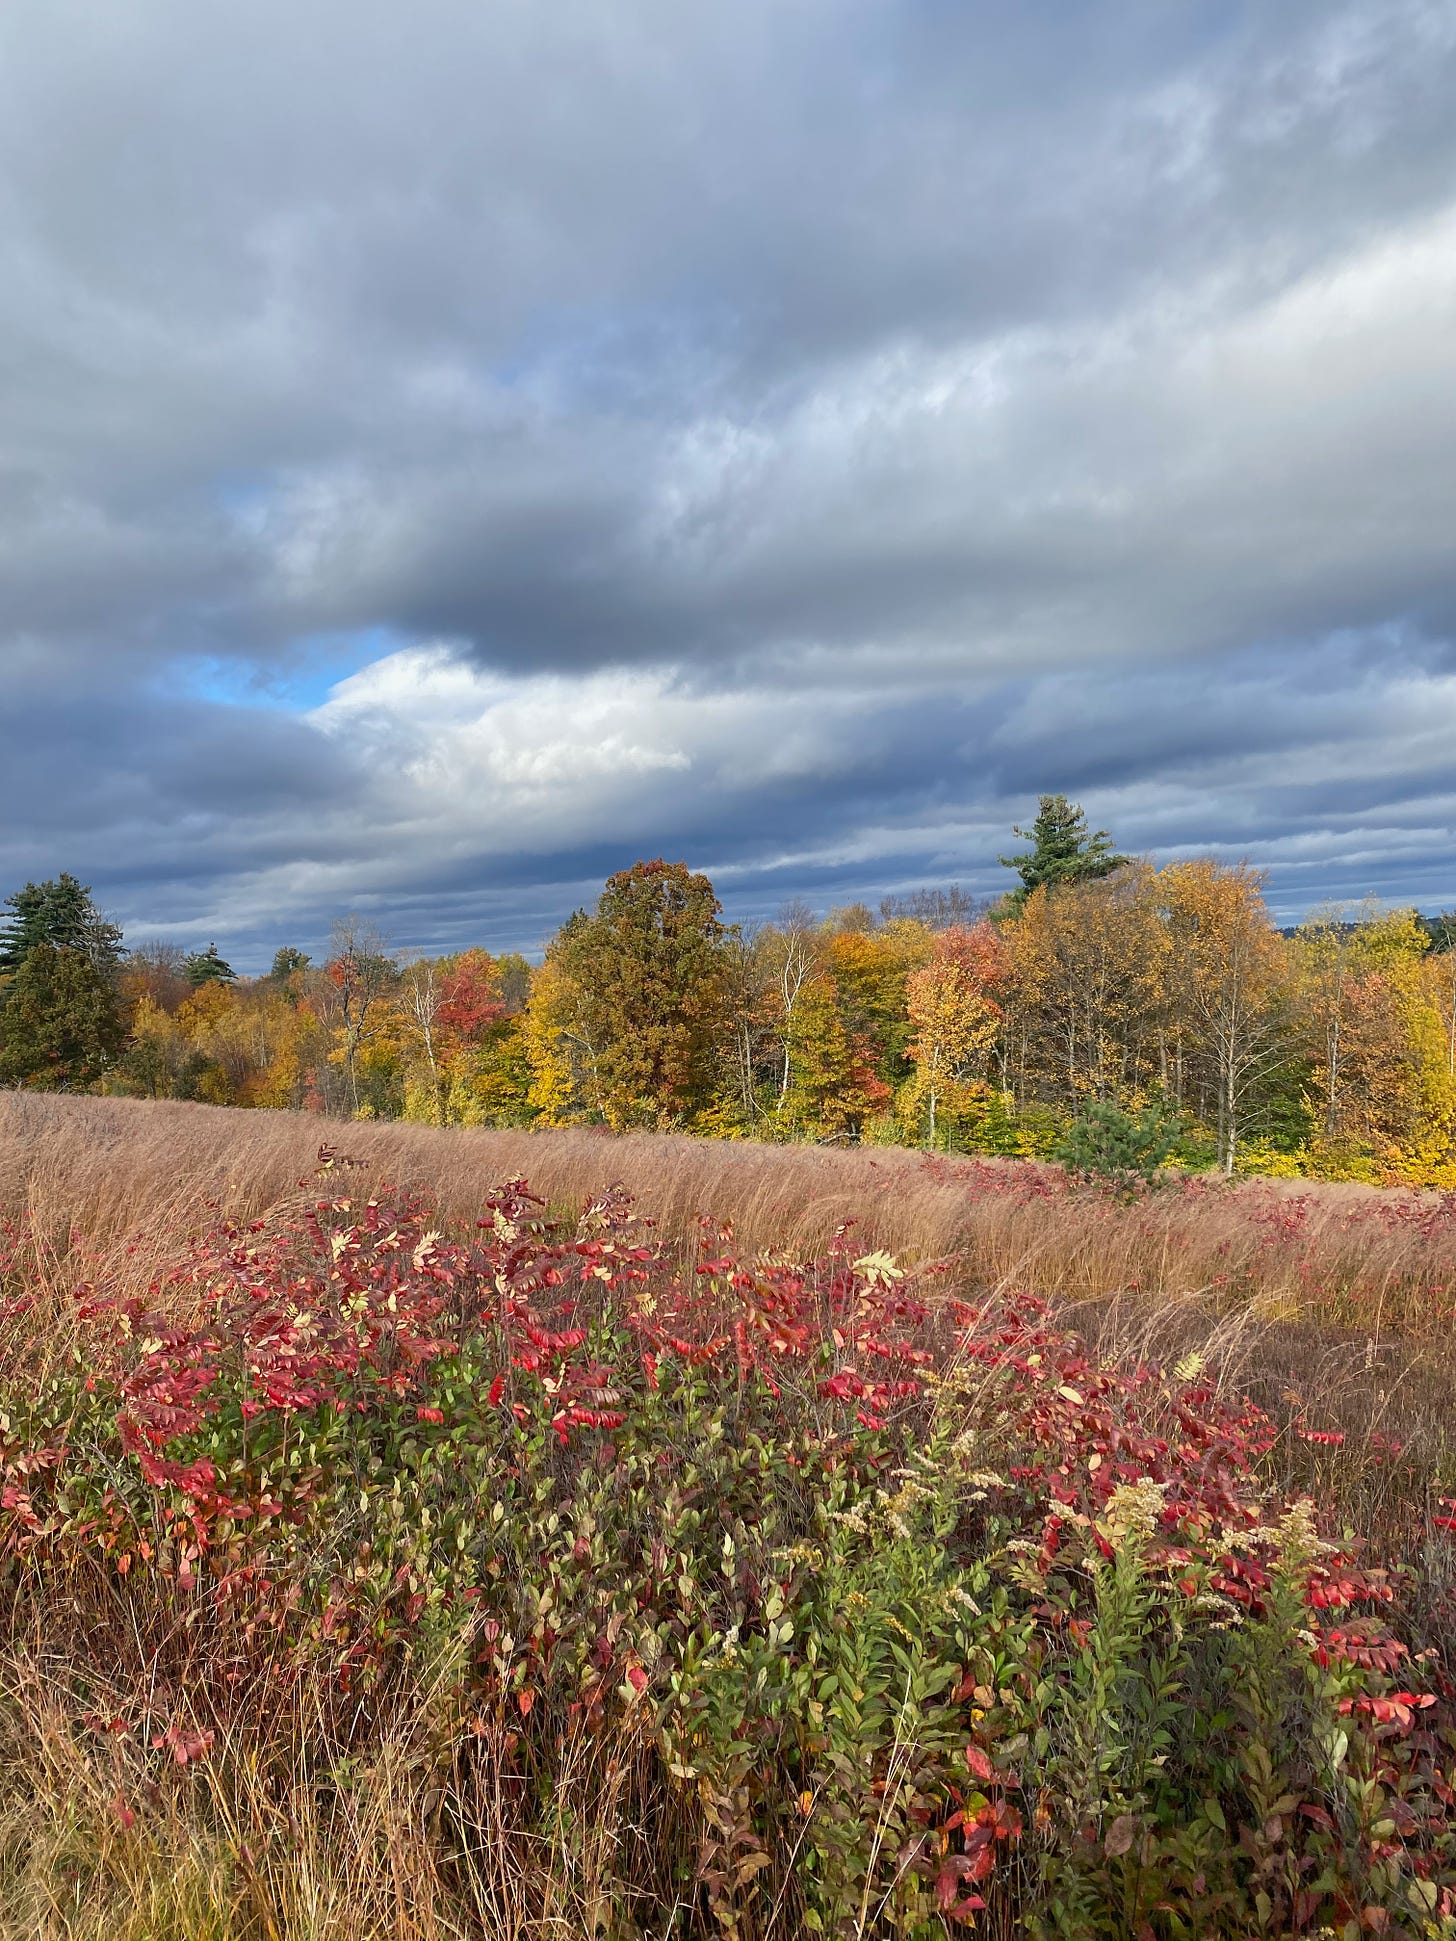 View of a windswept field of red and brown leaves and grasses. The line of red and gold trees on the horizon is lit up by the sun. The clouds are dark and dramatic.